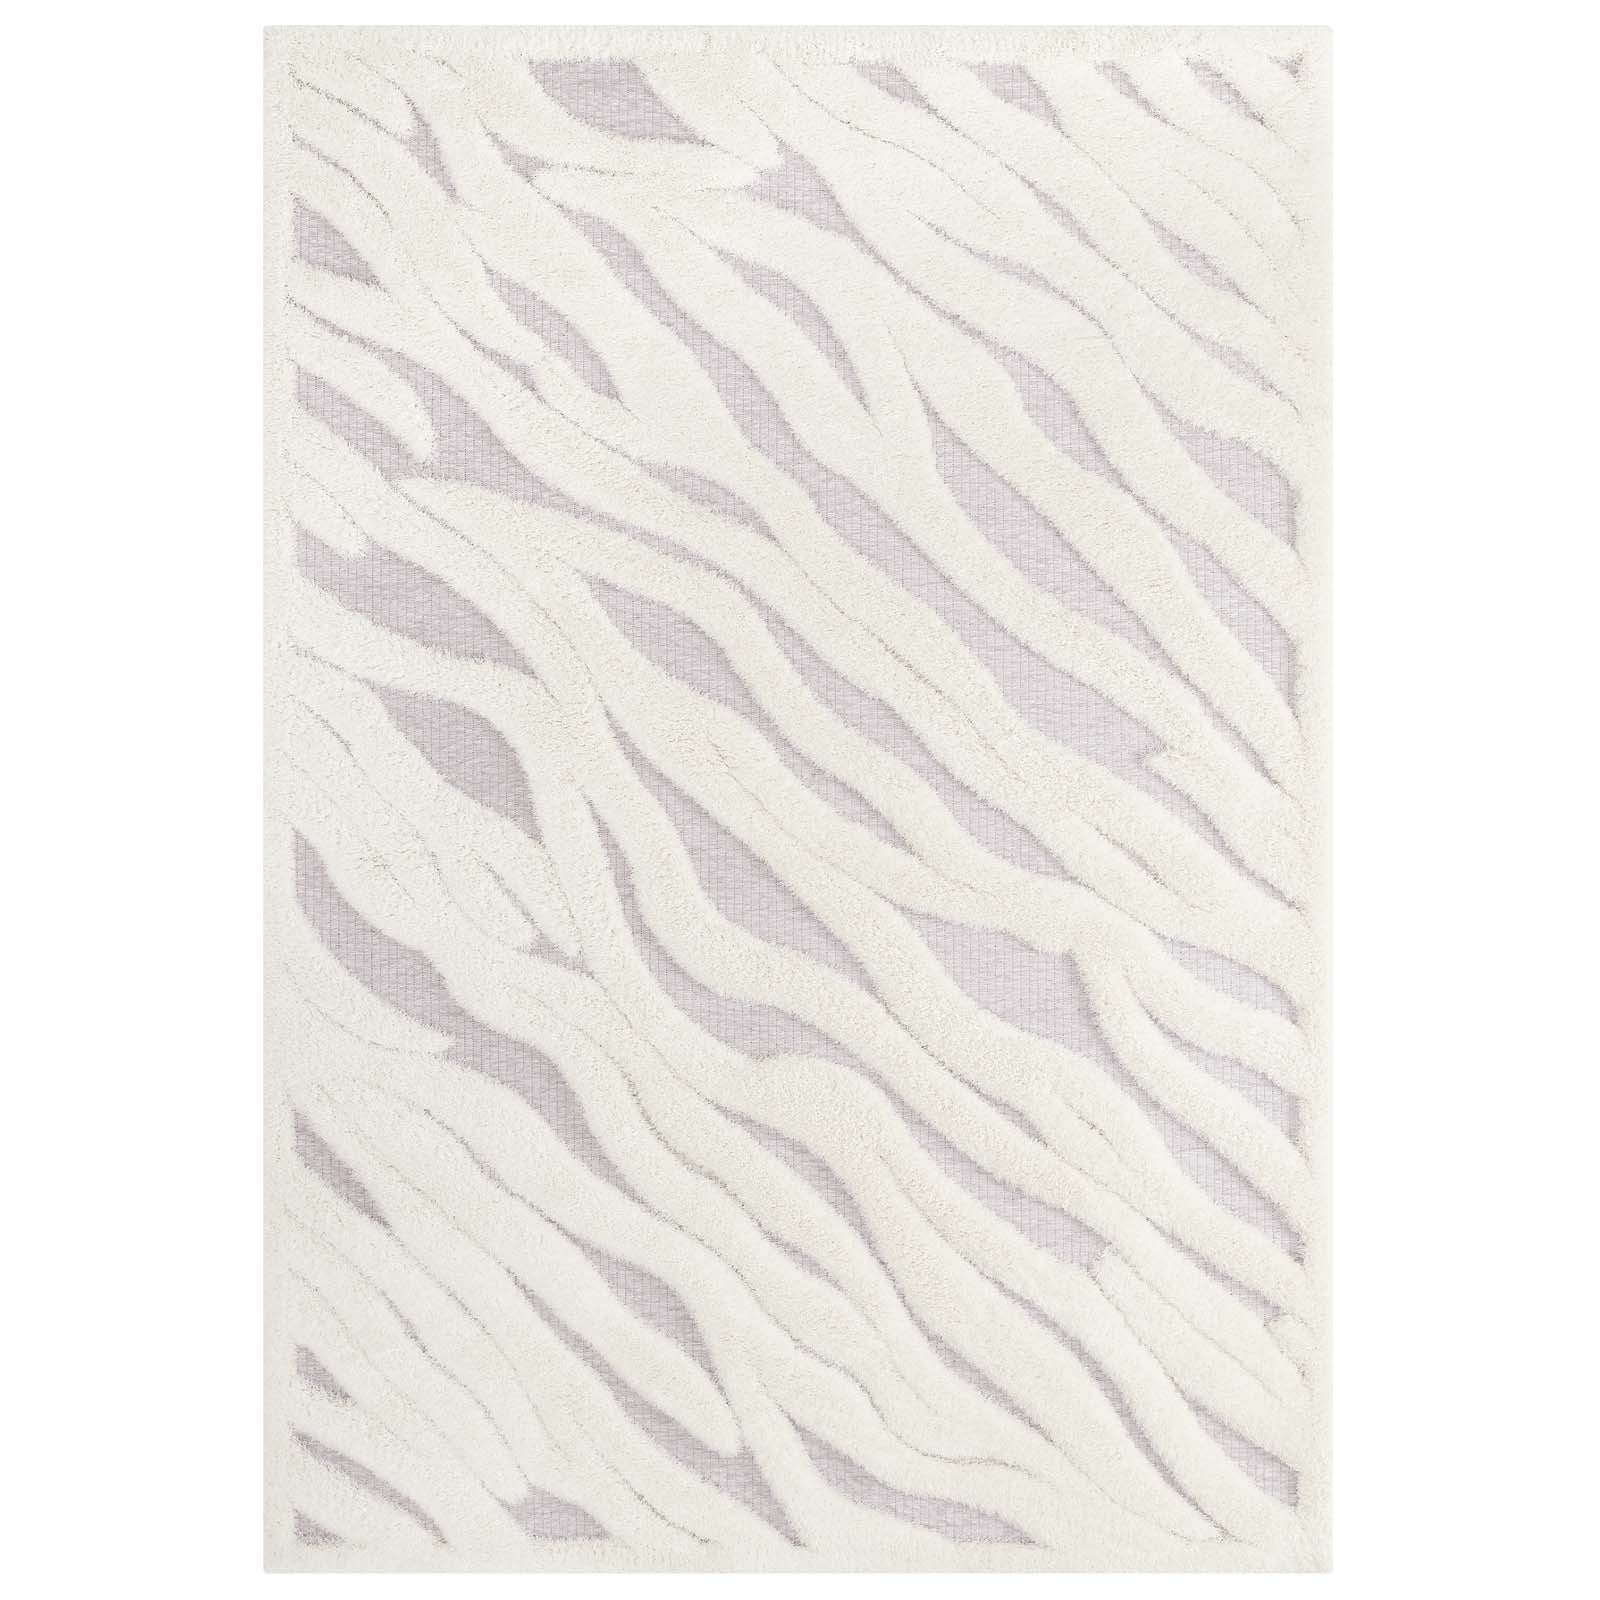 Whimsical Current Abstract Wavy Striped 5x8 Shag Area Rug - East Shore Modern Home Furnishings